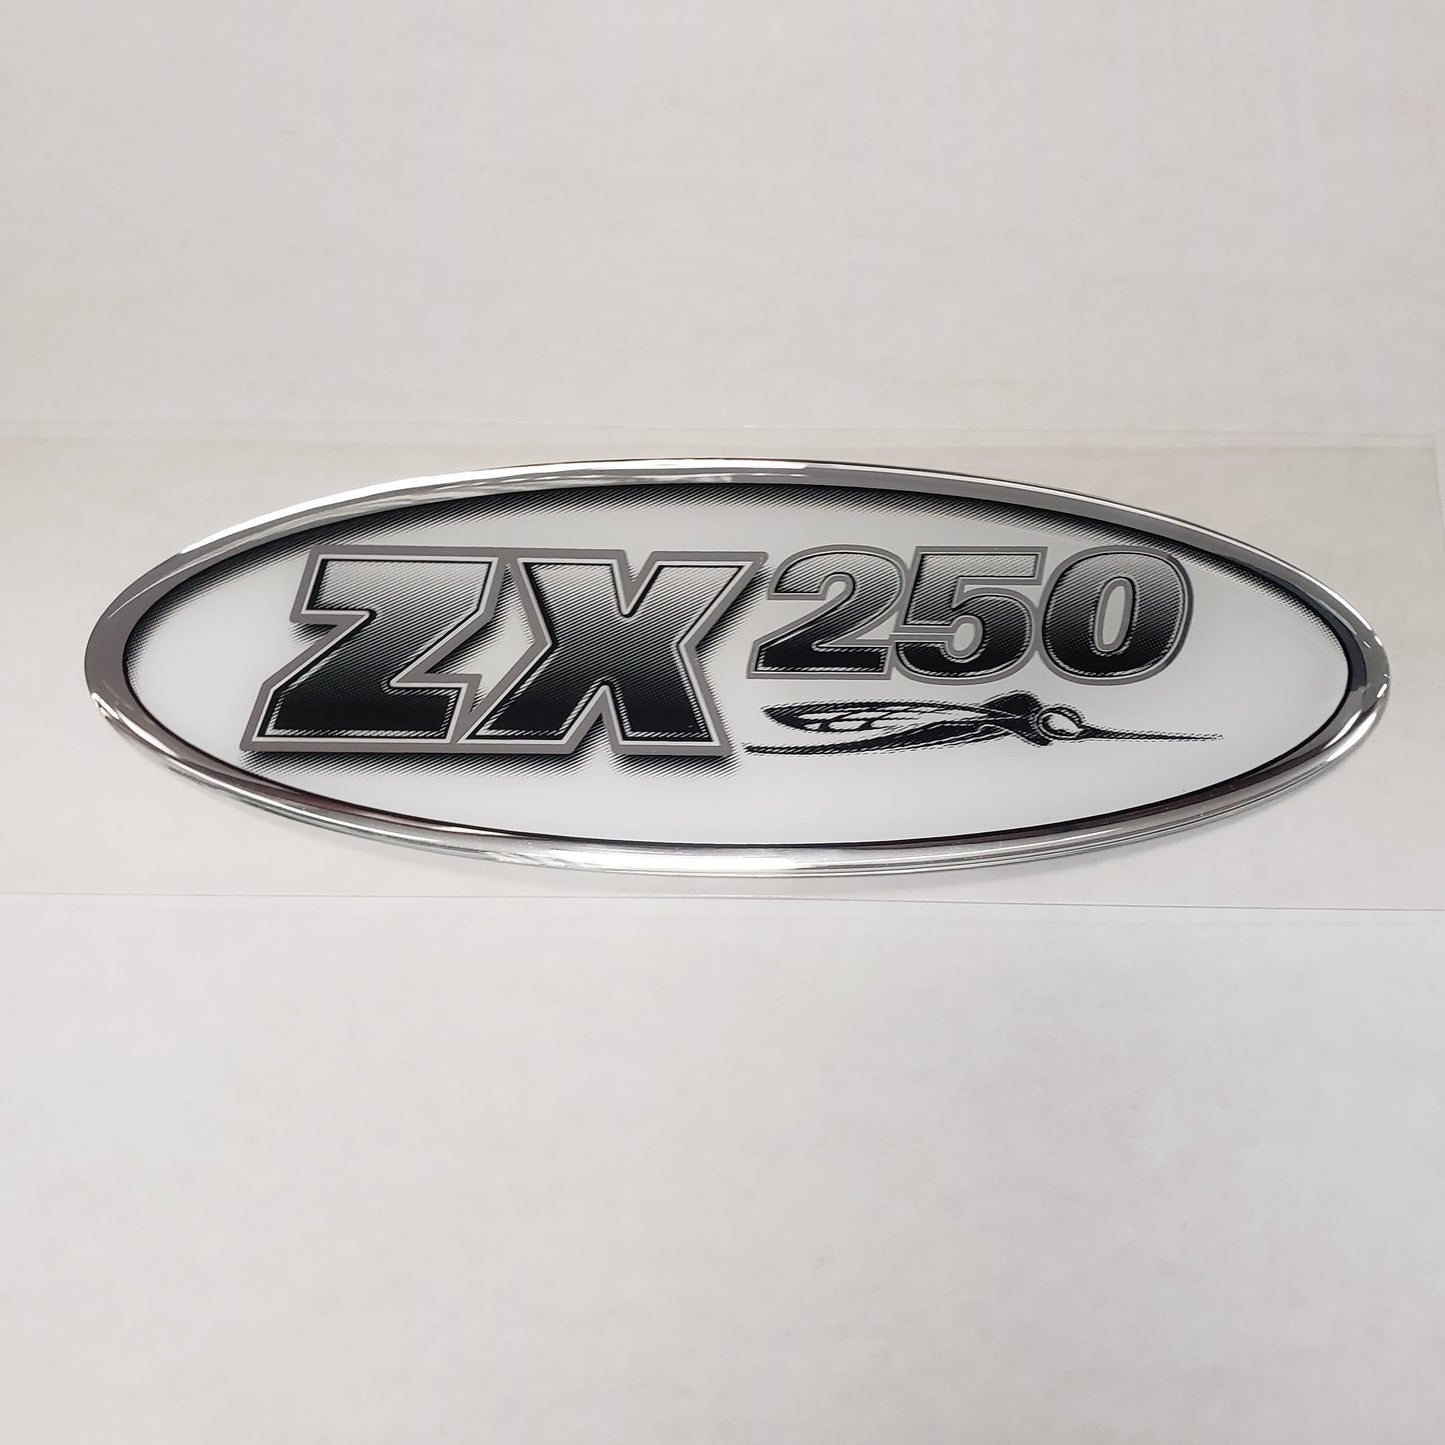 New Authentic Skeeter ZX250 Oval Emblem Black/Silver 8 1/2" X 3"